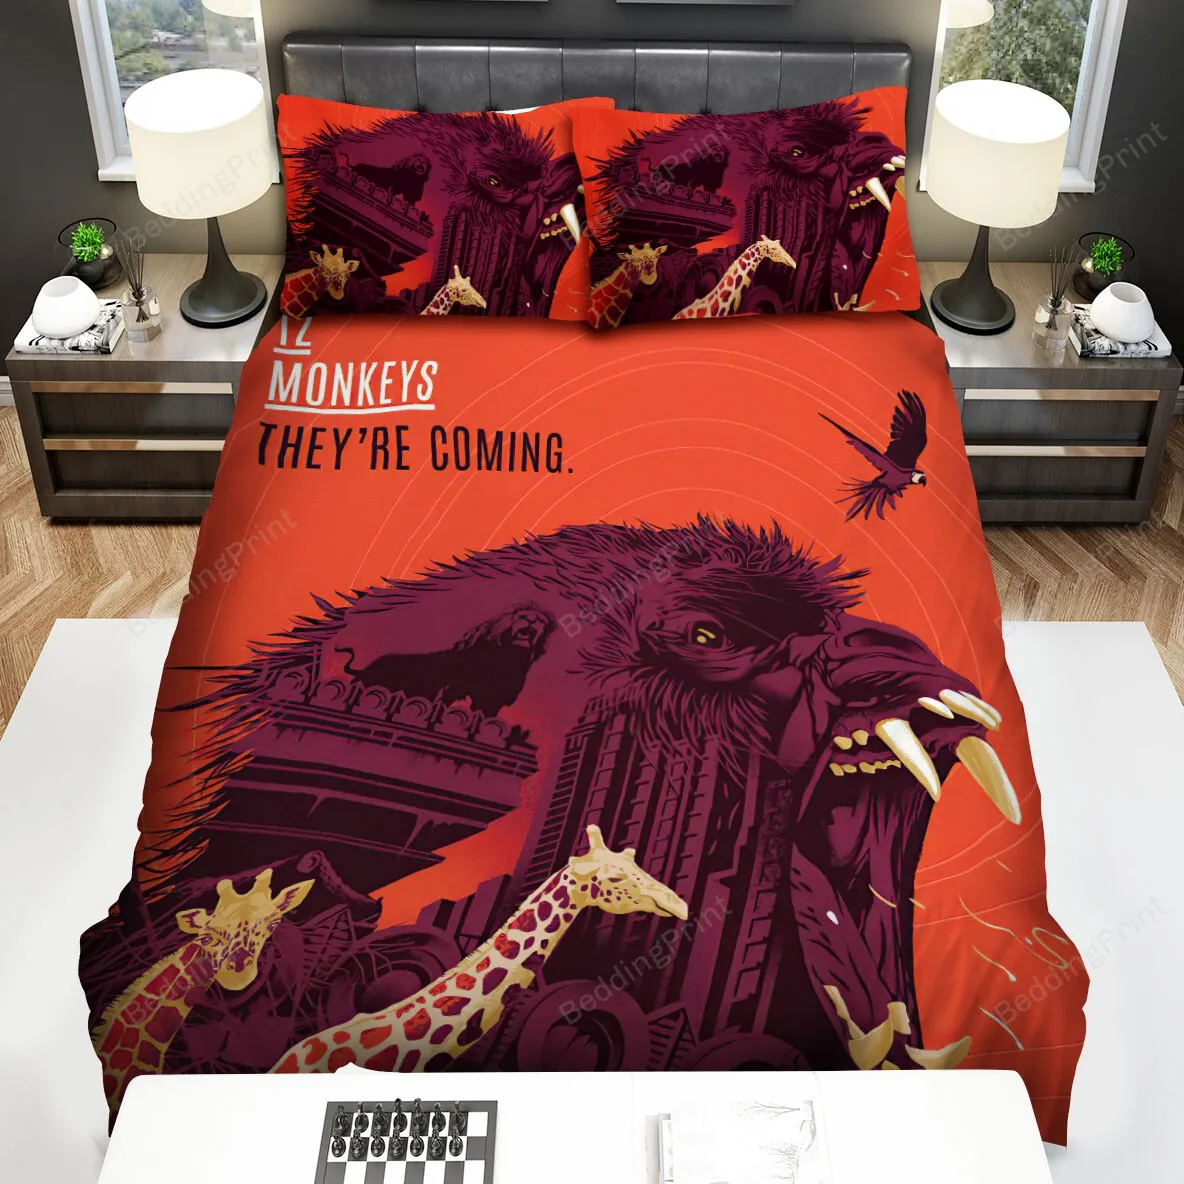 12 Monkeys (20152018) They're Coming Movie Poster Bed Sheets Spread Comforter Duvet Cover Bedding Sets